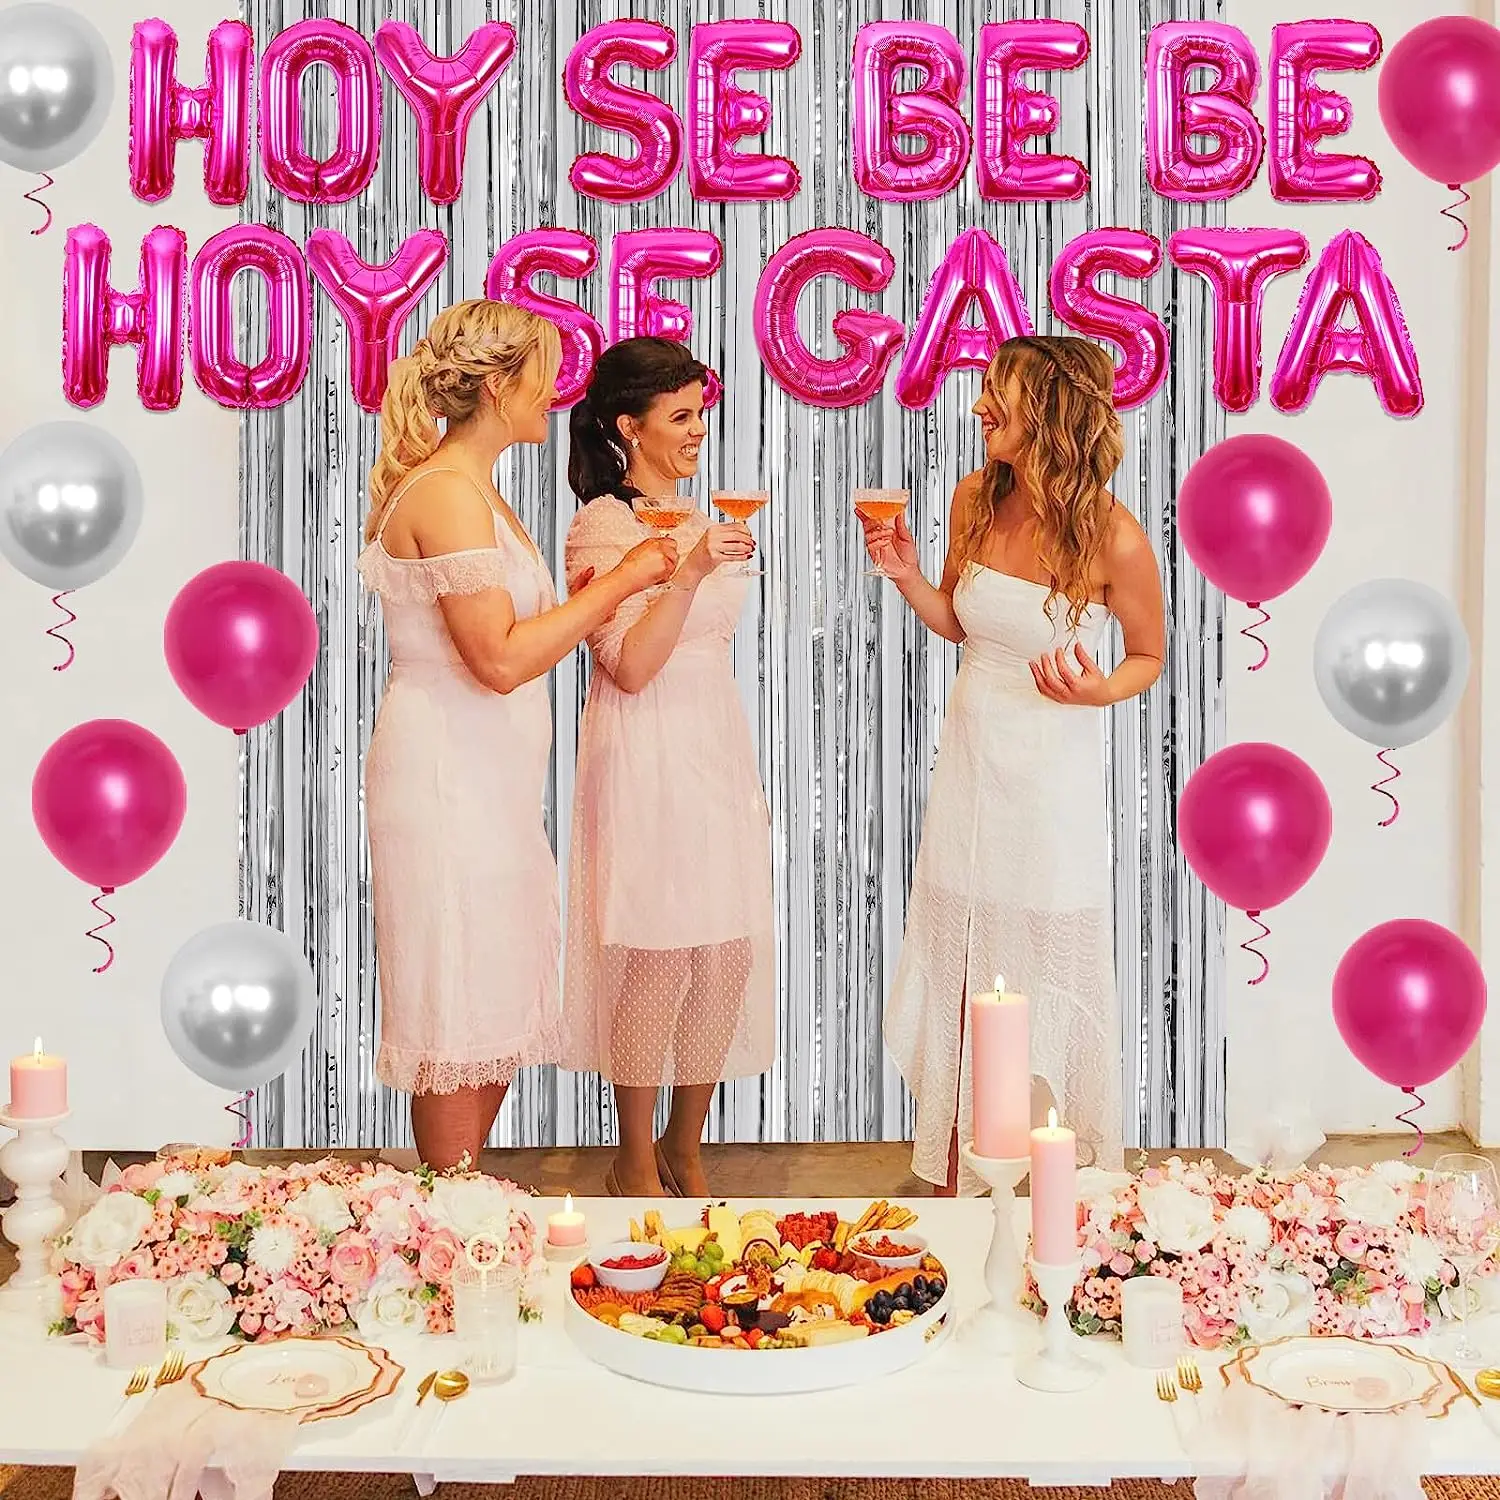 Bad Bunny Party Decorations Hot Pink Silver Hoy Se Bebe Hoy Se Gasta Banner Curtain for Women Birthday Bachelorette Party Decor - AliExpress